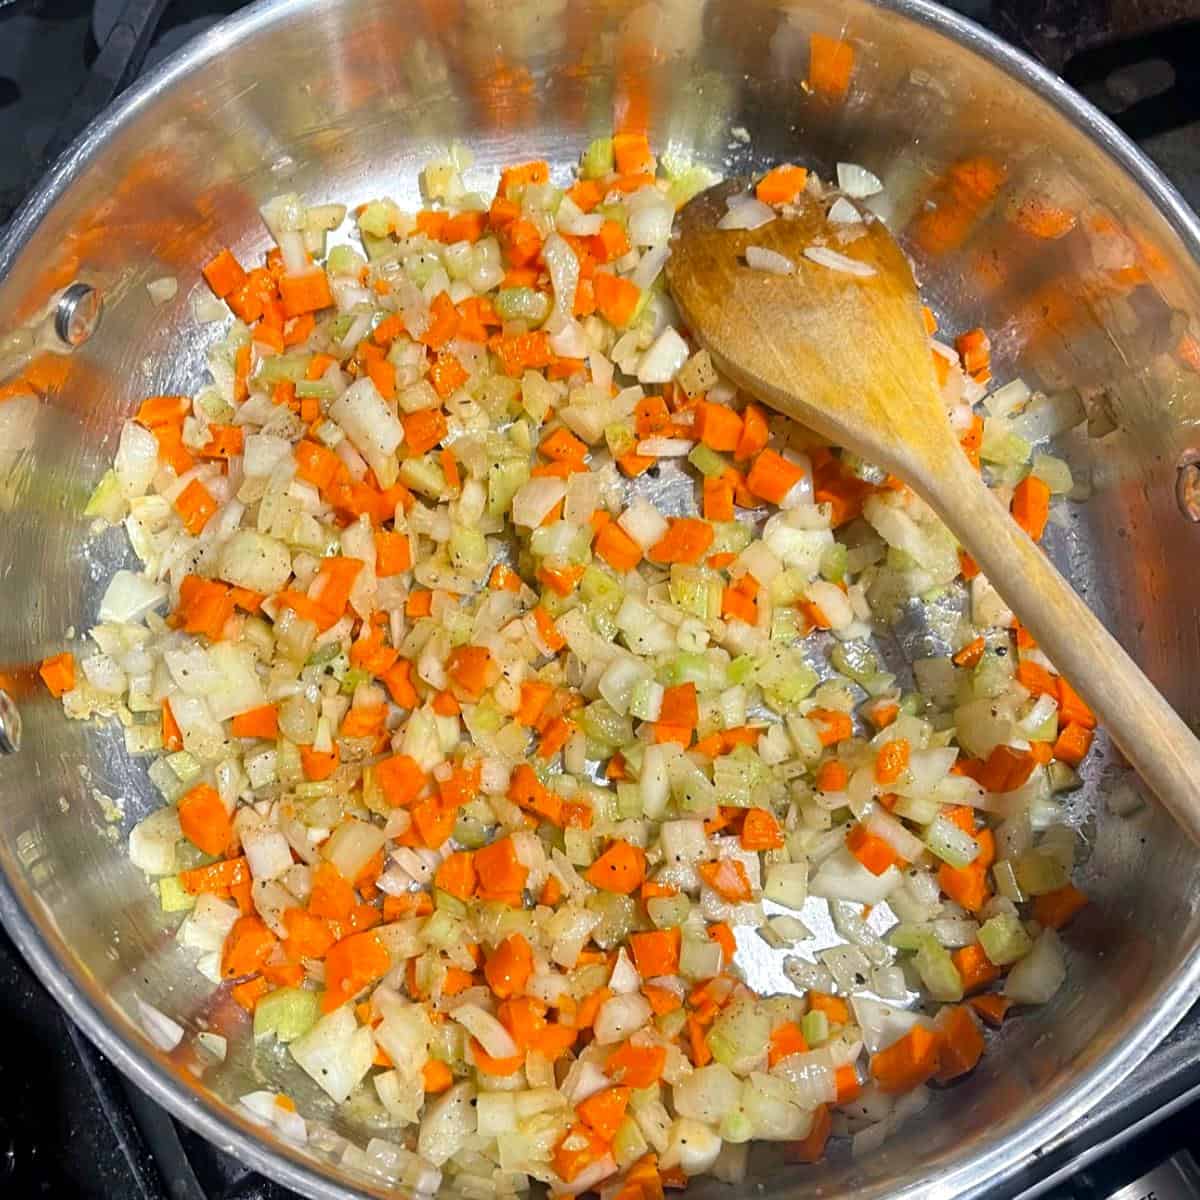 Garlic, carrots, onions and celery sauteing in pan with wooden ladle.